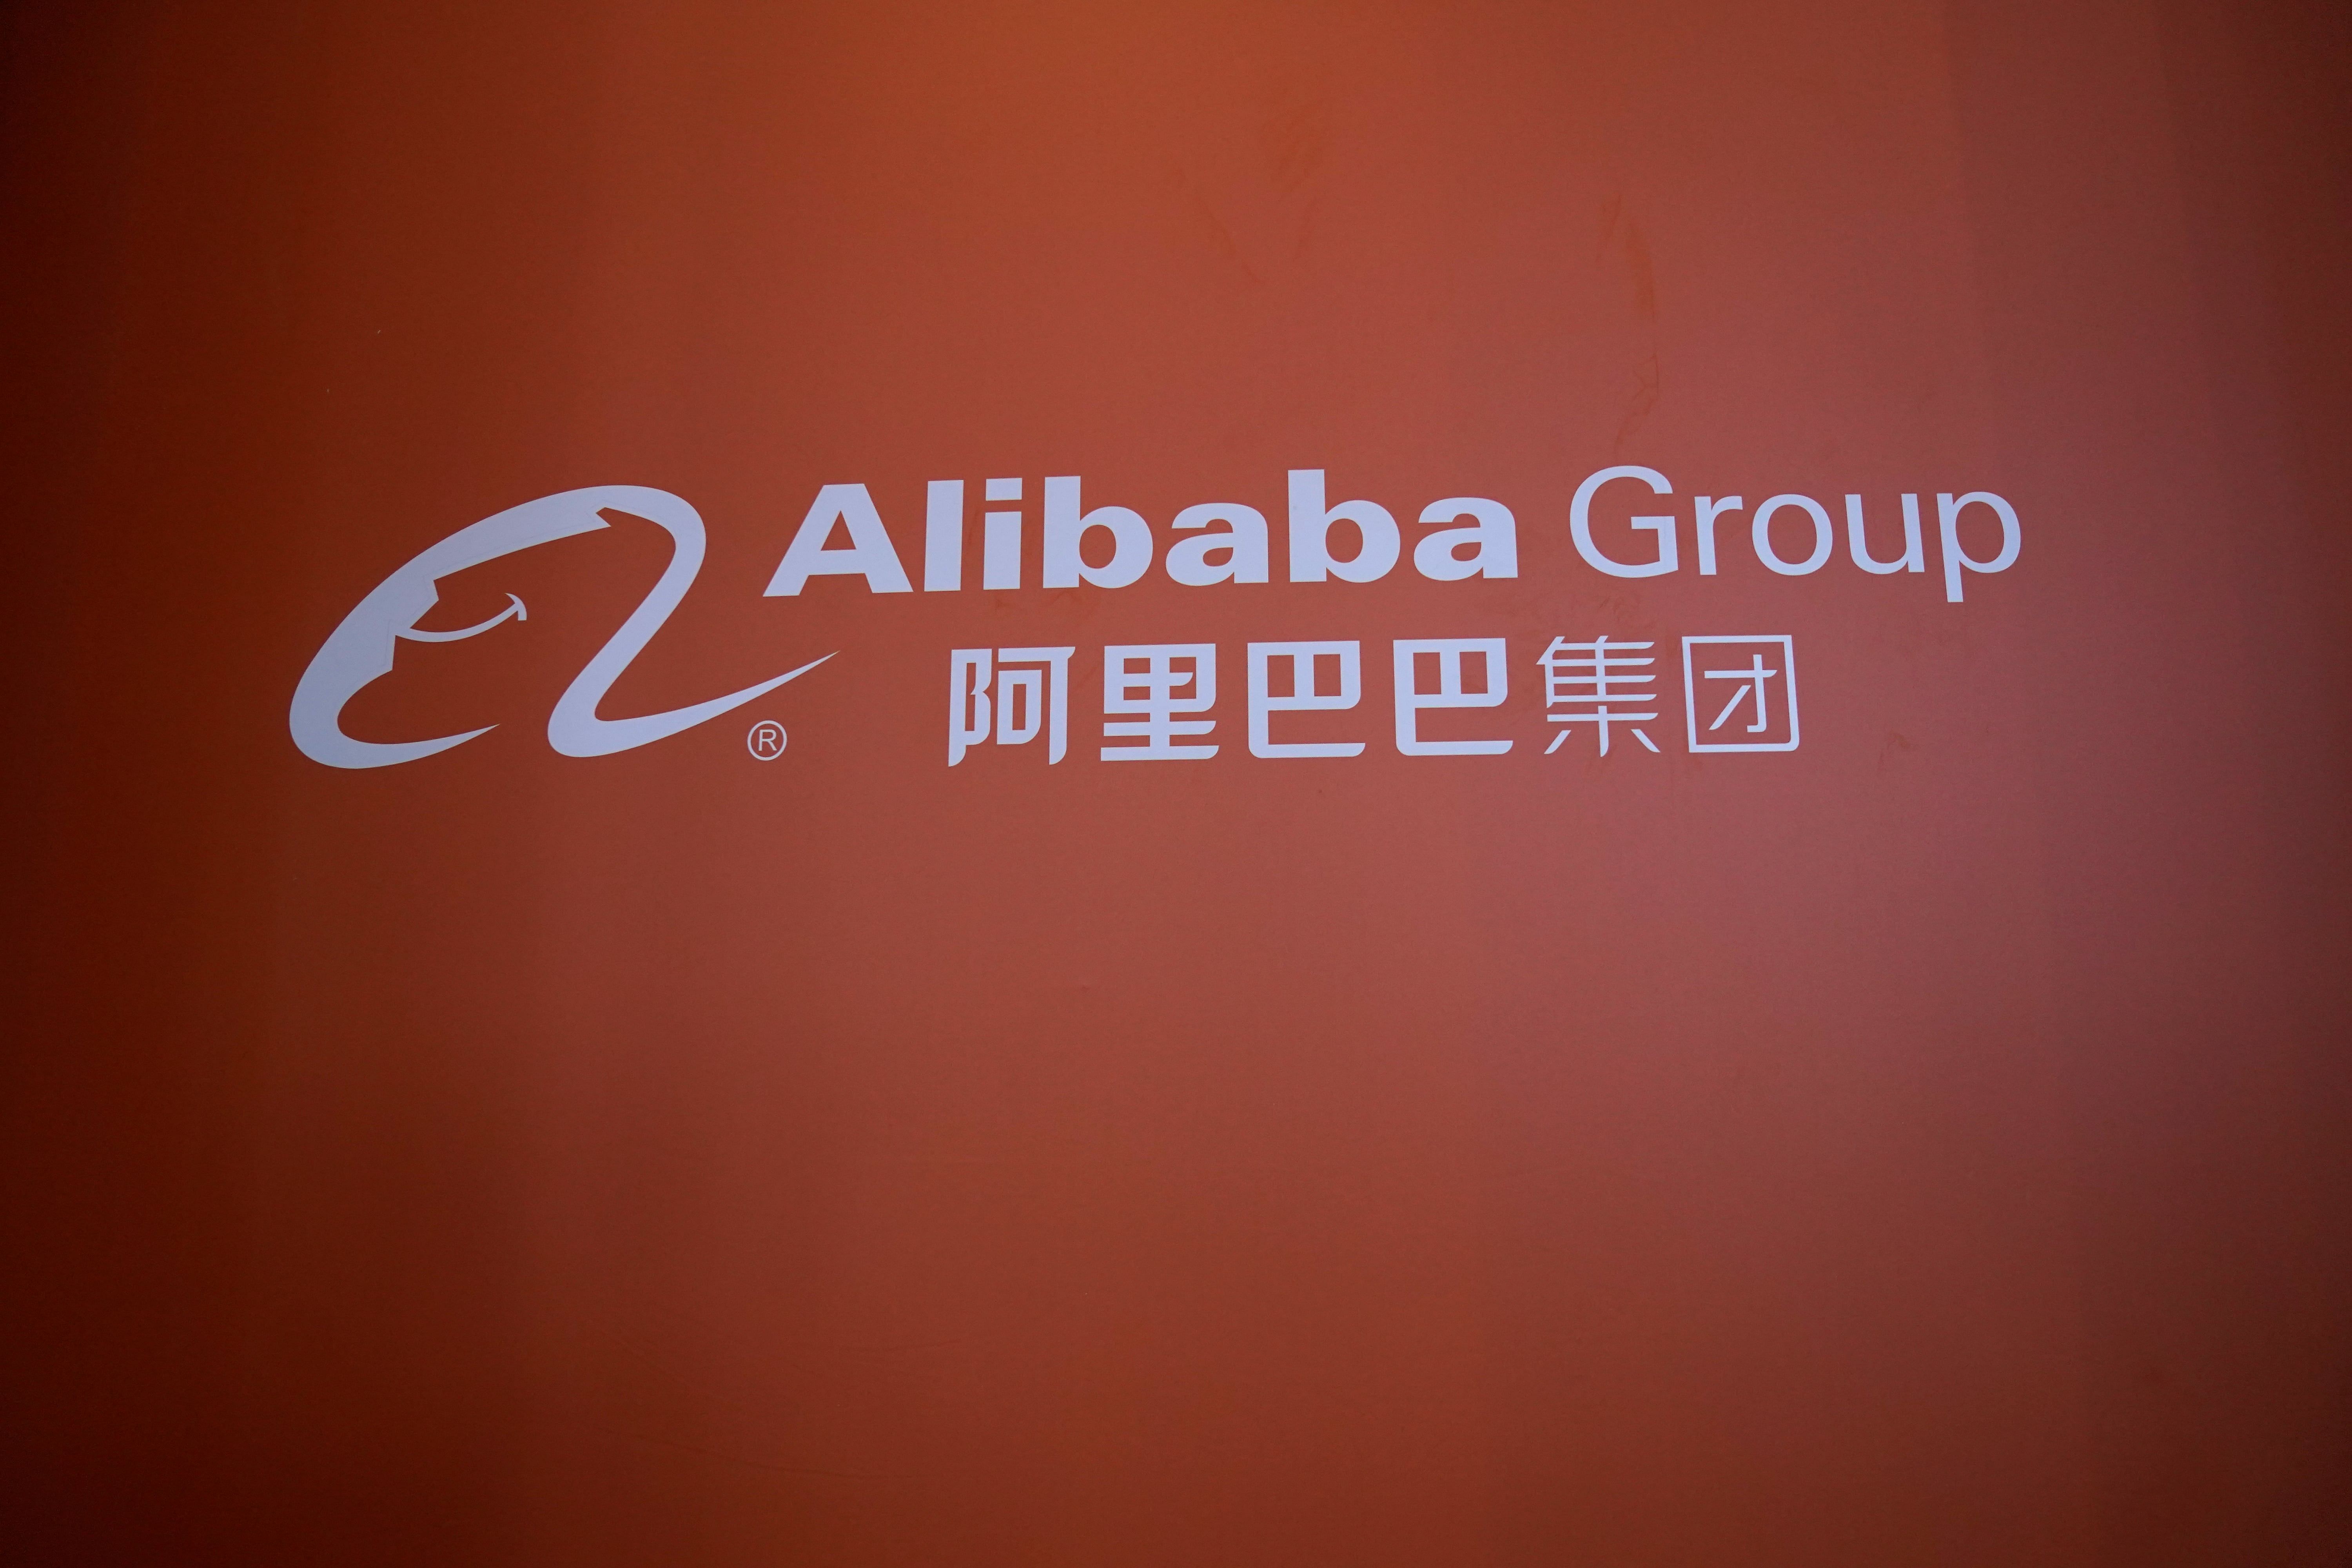 Alibaba has already bought a small stake in Yunda which is below threshold for disclosure, said two other people with knowledge of the matter. (Credit: Reuters Photo)